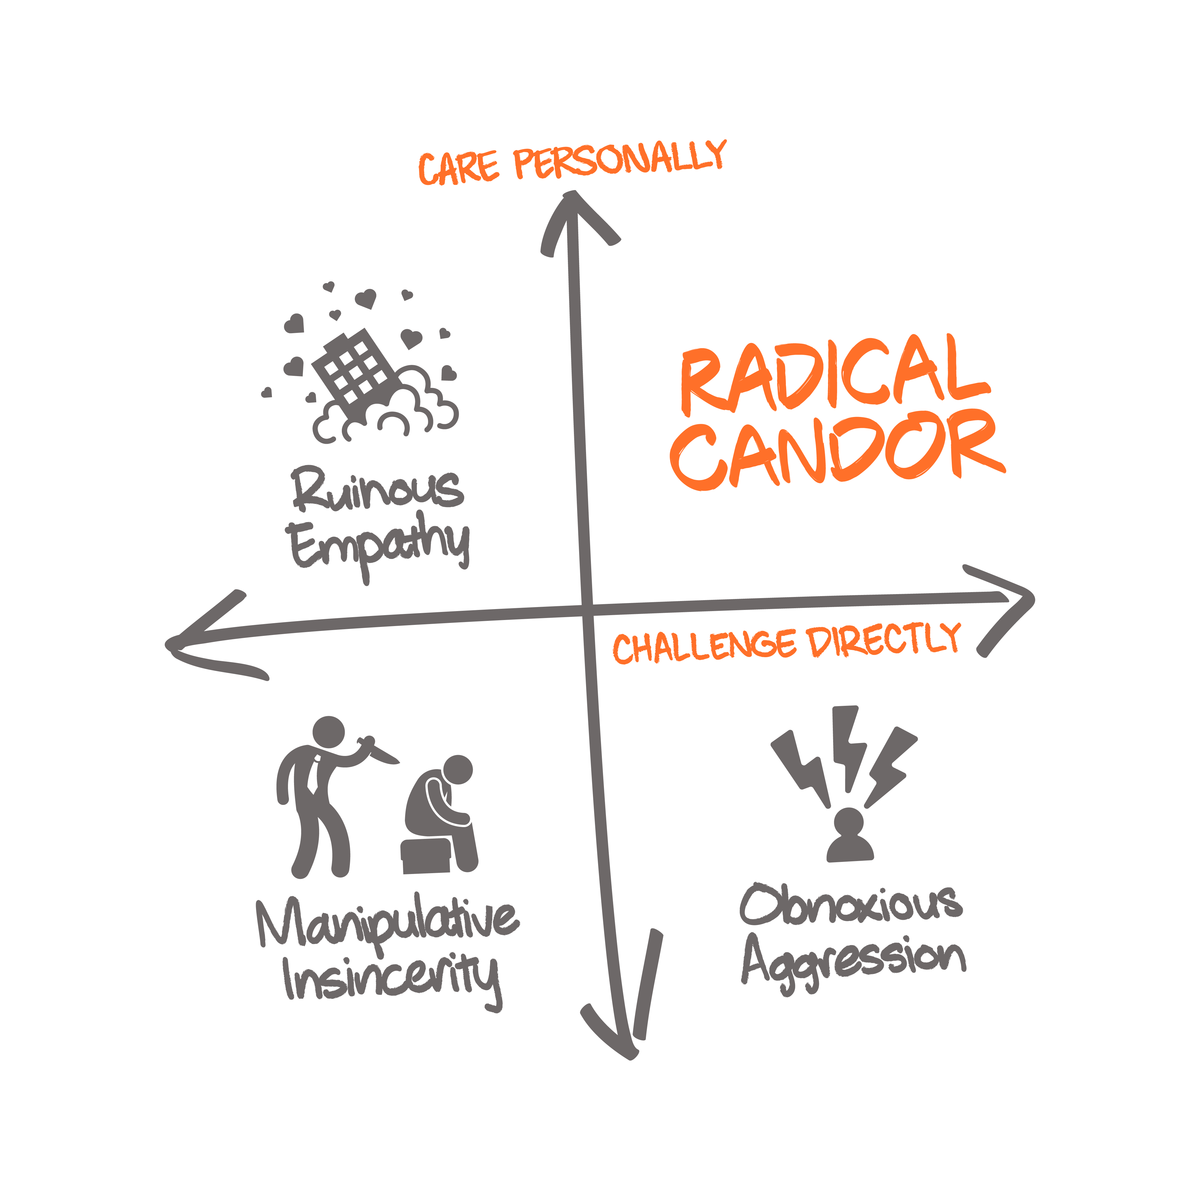 5 Things You Need To Know About Radical Candor, by Mandalah